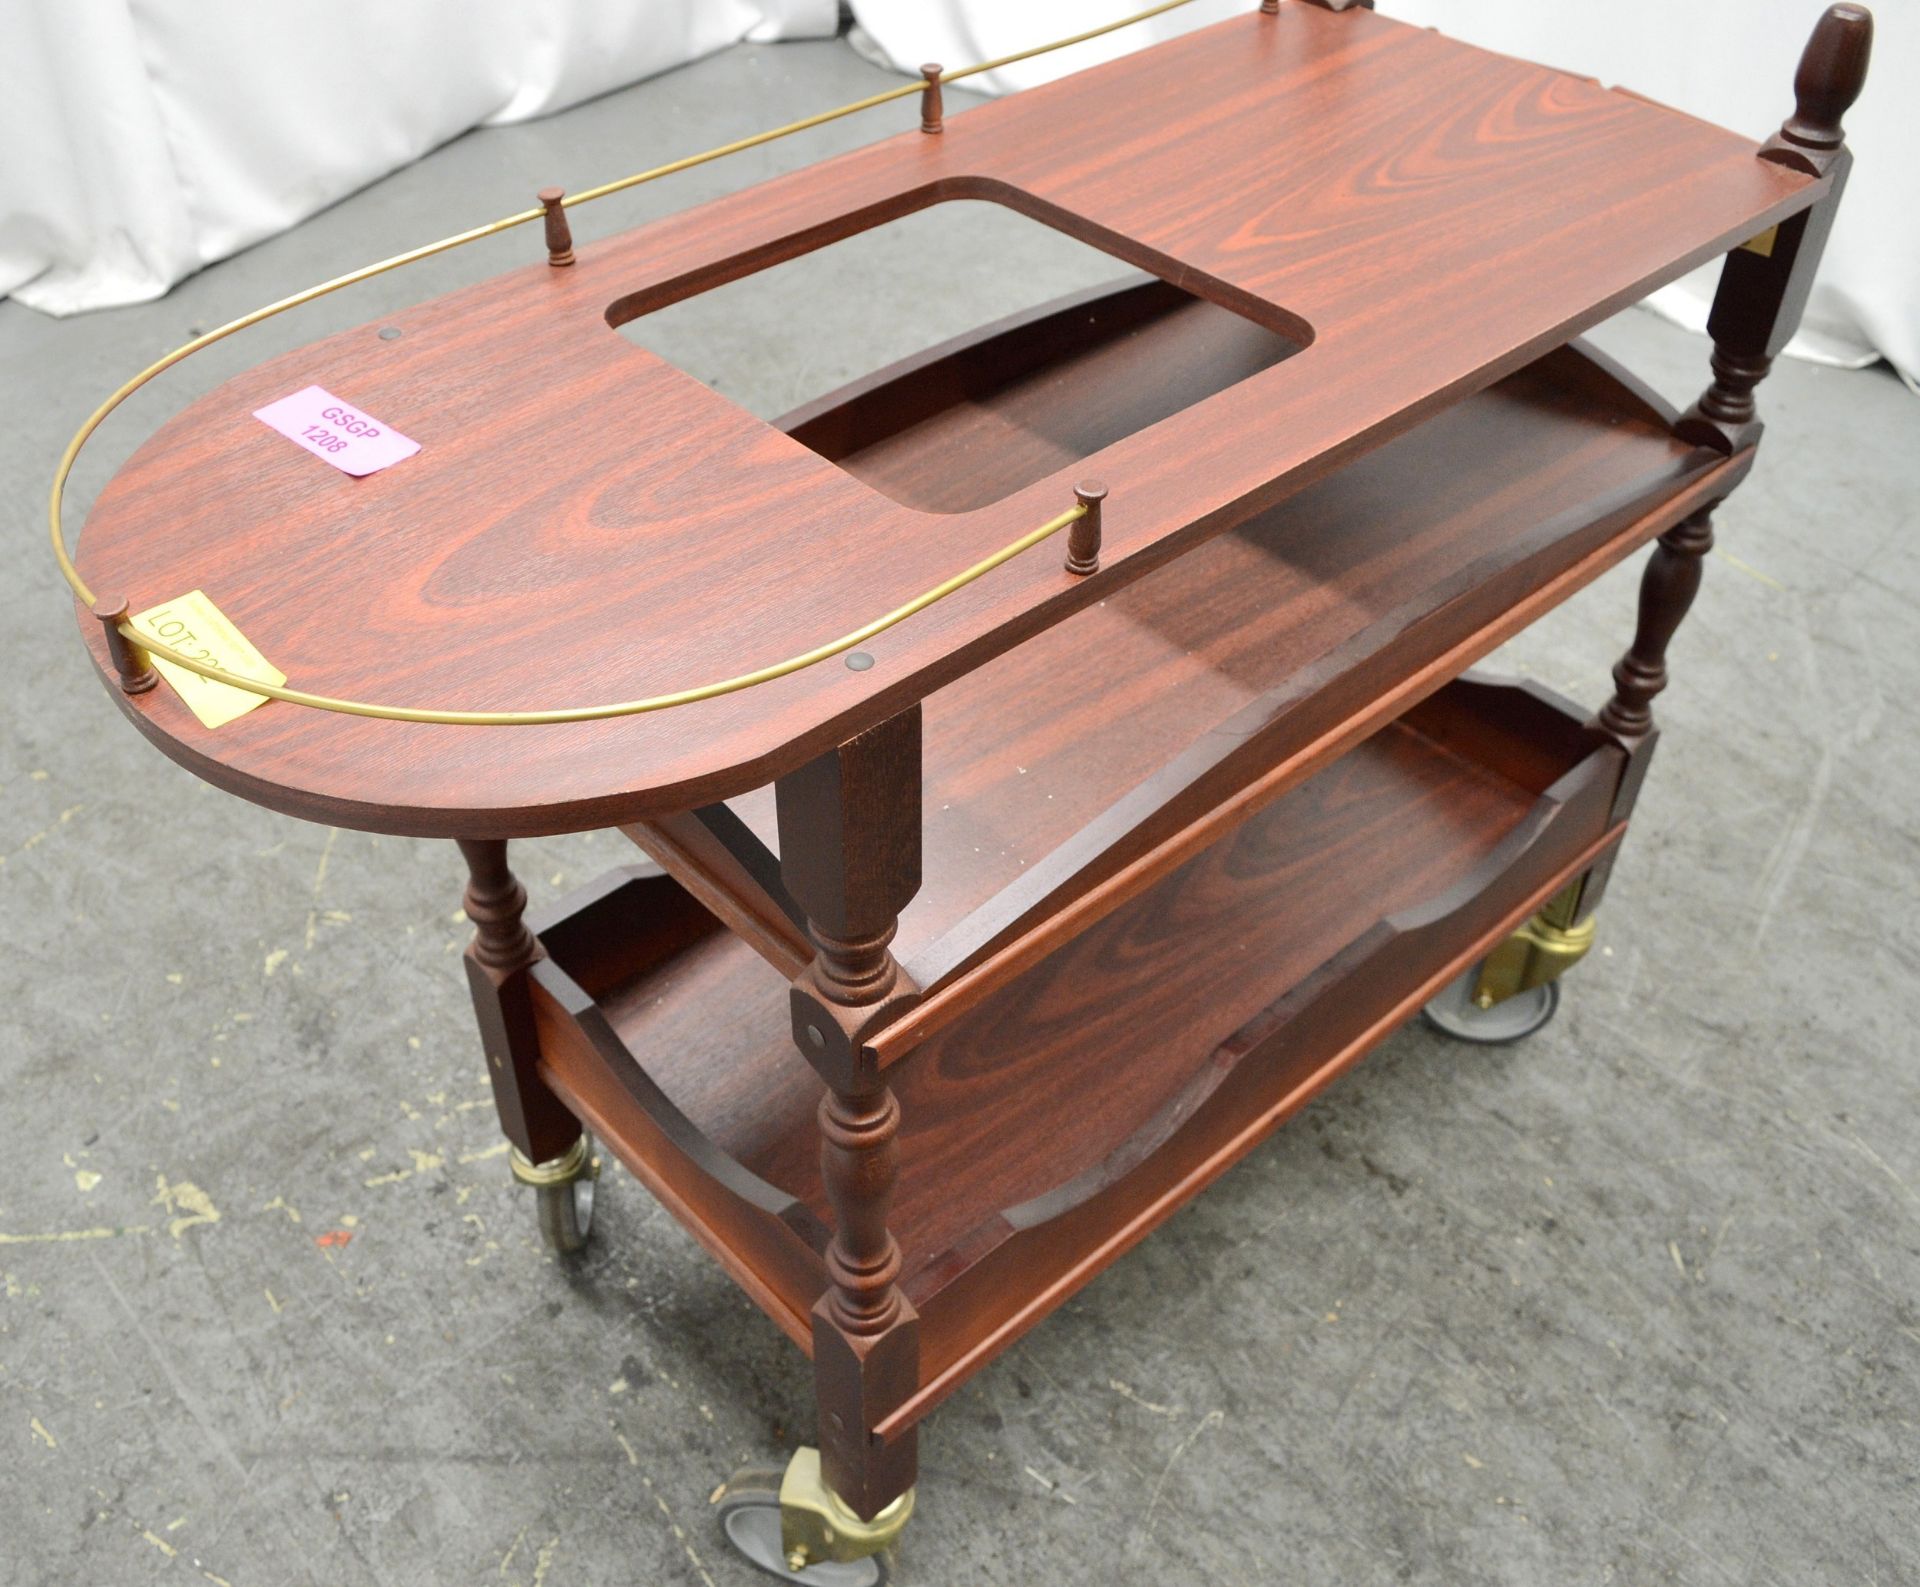 Mahogany Effect Serving Trolley W1080 x D400 x H895mm. - Image 2 of 4